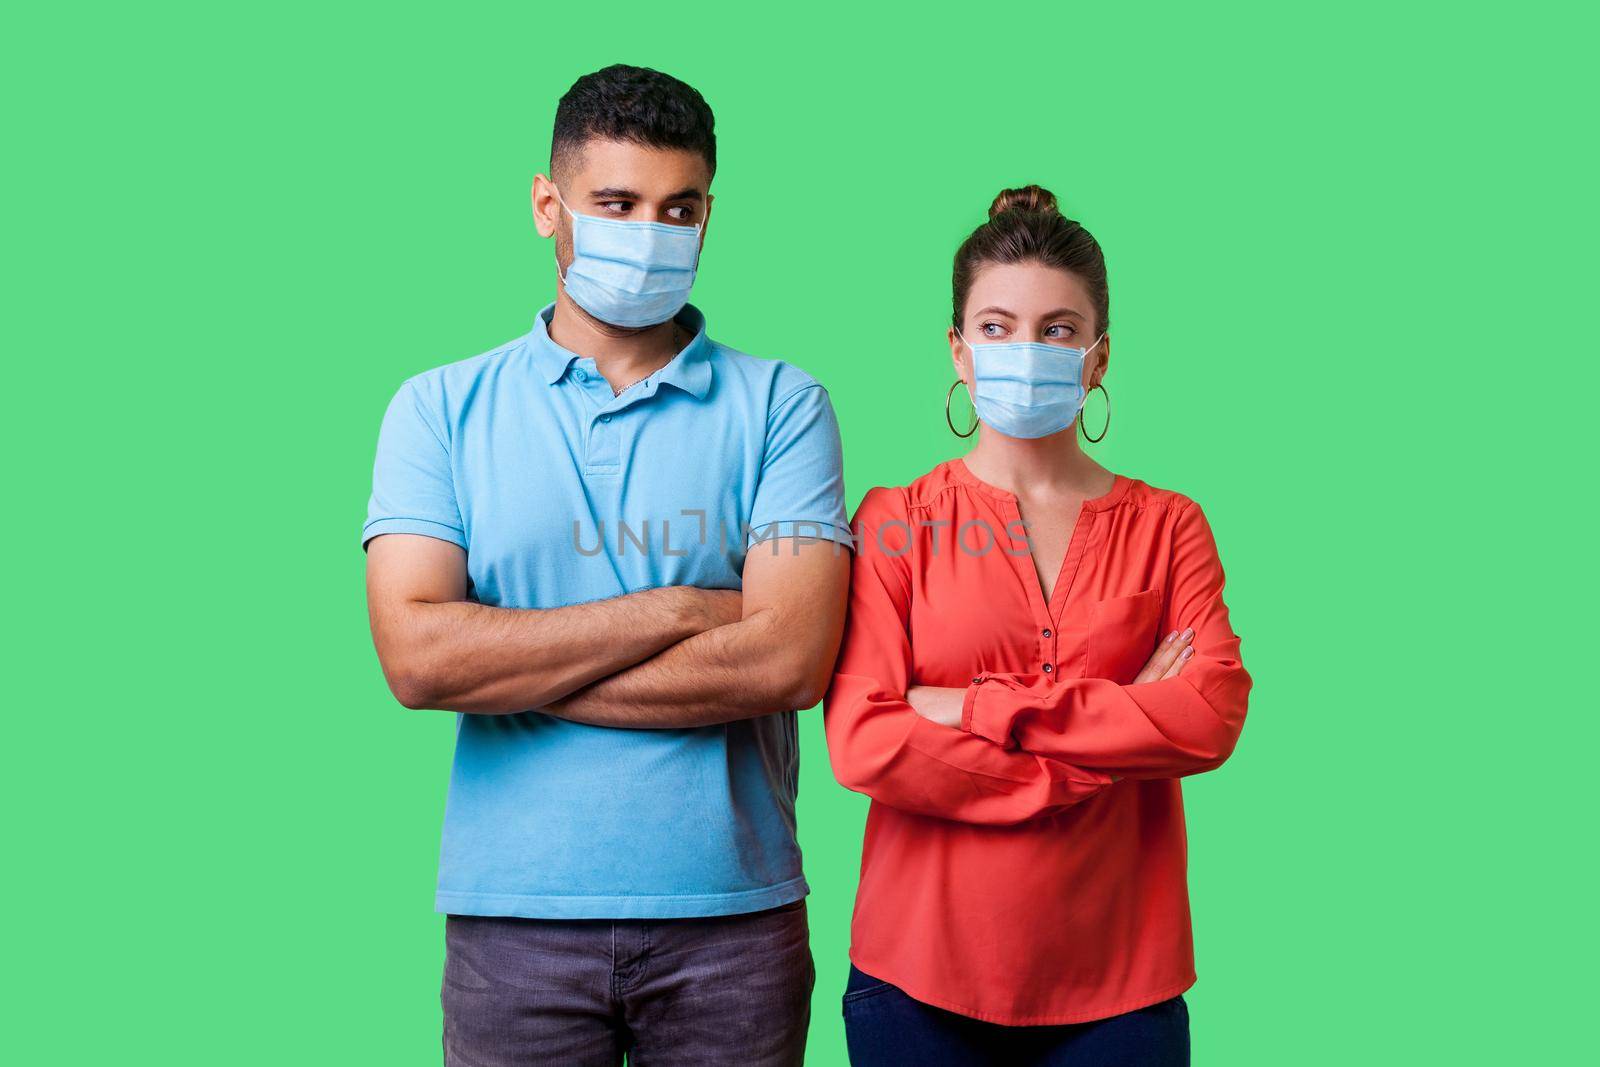 Portrait of upset couple with surgical medical mask standing together with crossed hands, looking sideways at each other with resentful glance, suspicion. isolated on green background, indoor studio